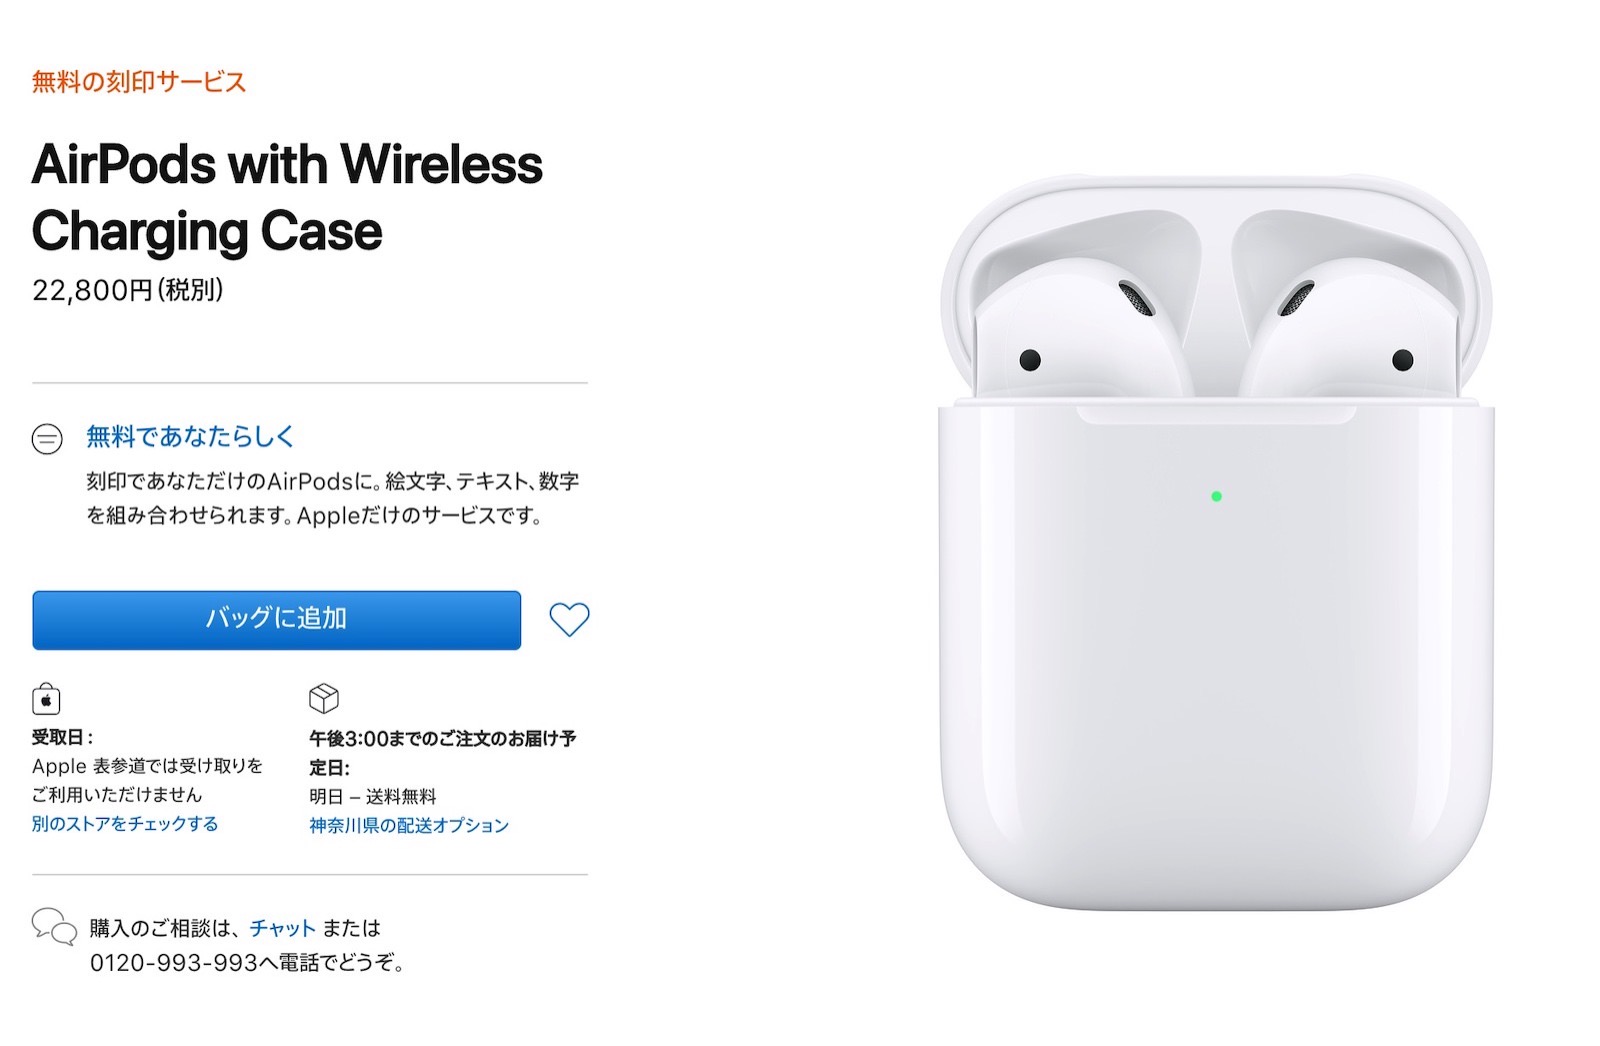 Airpods with wireless charging case